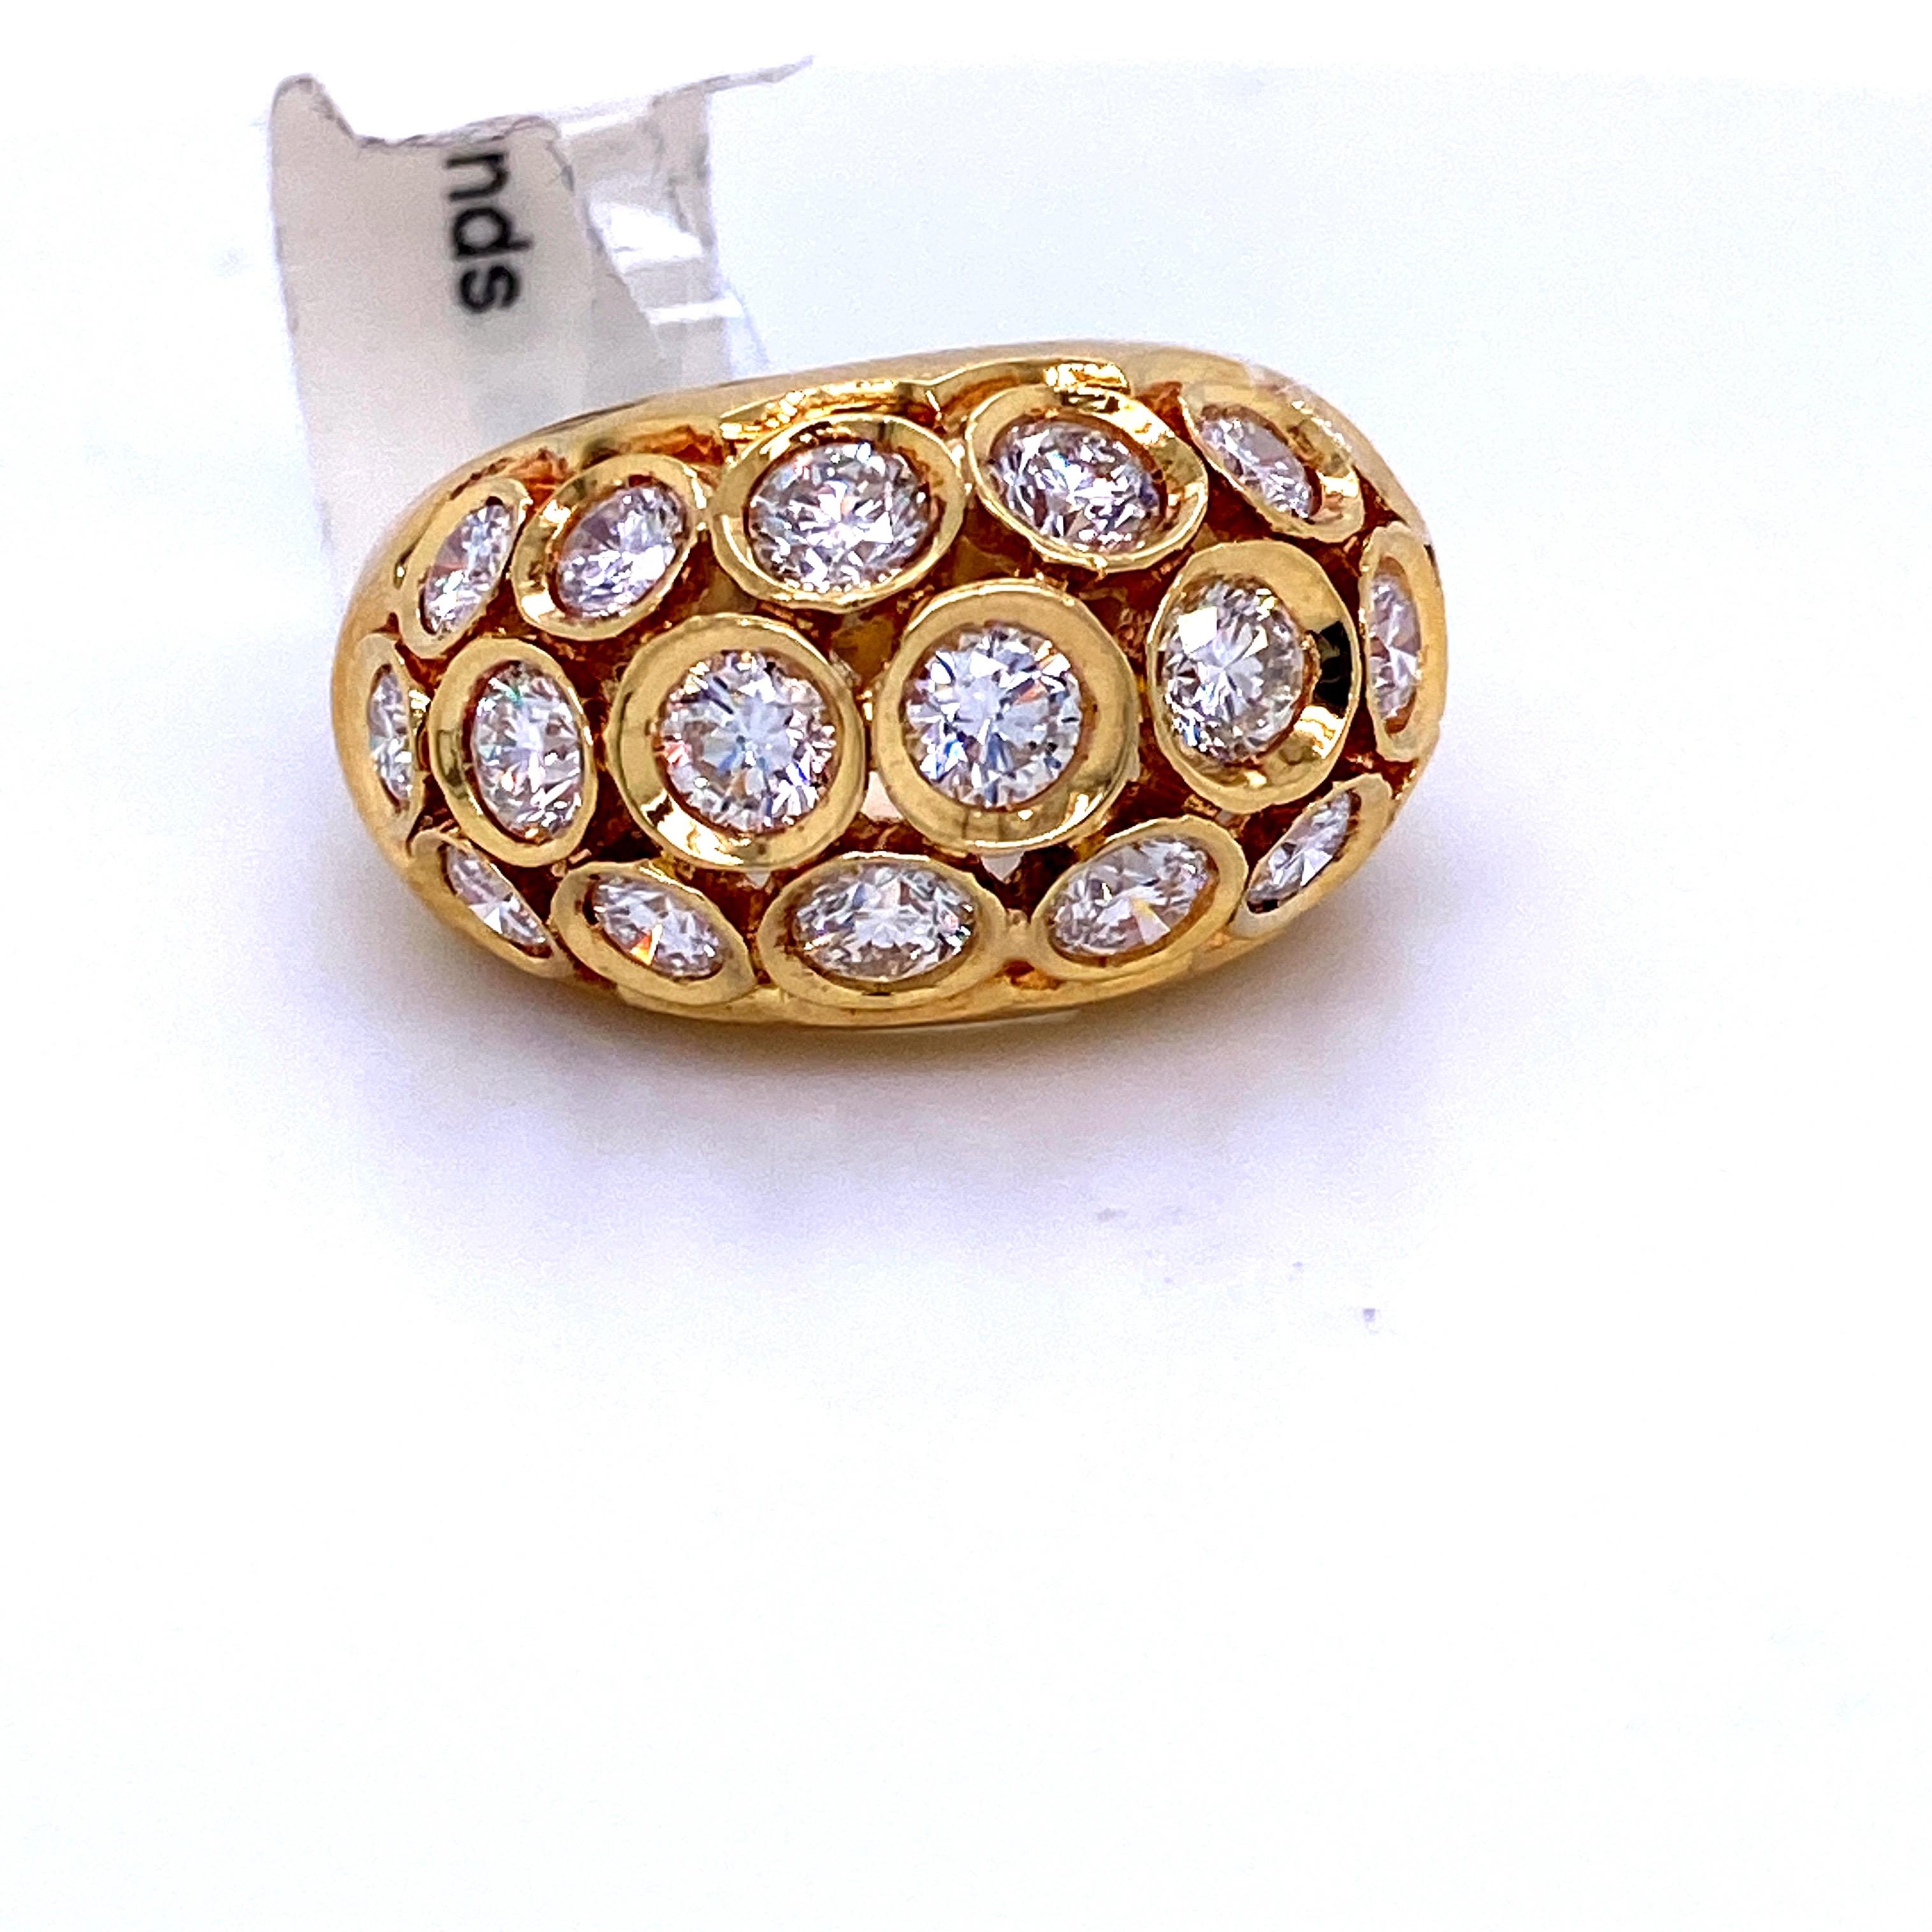 18K Yellow gold dome ring featuring 19 round brilliants in a honeycomb motif weighing 2.77 carats.
Average Stone: 0.15 PTS
Color G
Clarity SI

SIZE 6.25
Sizeable free of charge